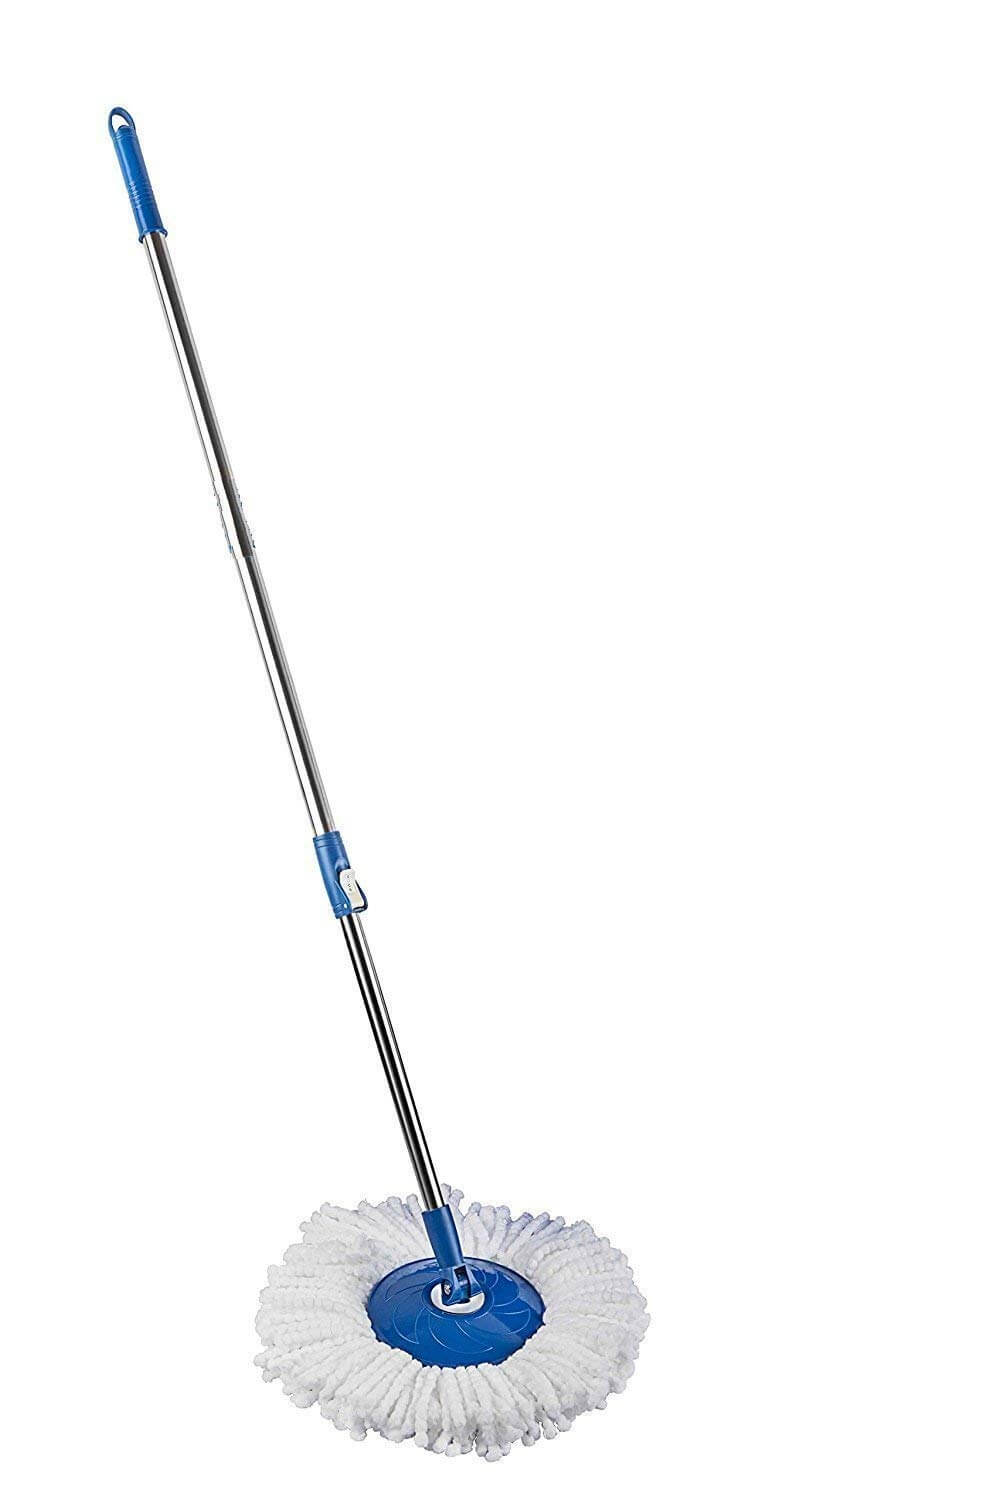 Lariox Floor Cleaning Spin Mop Stick with Extendable Handle